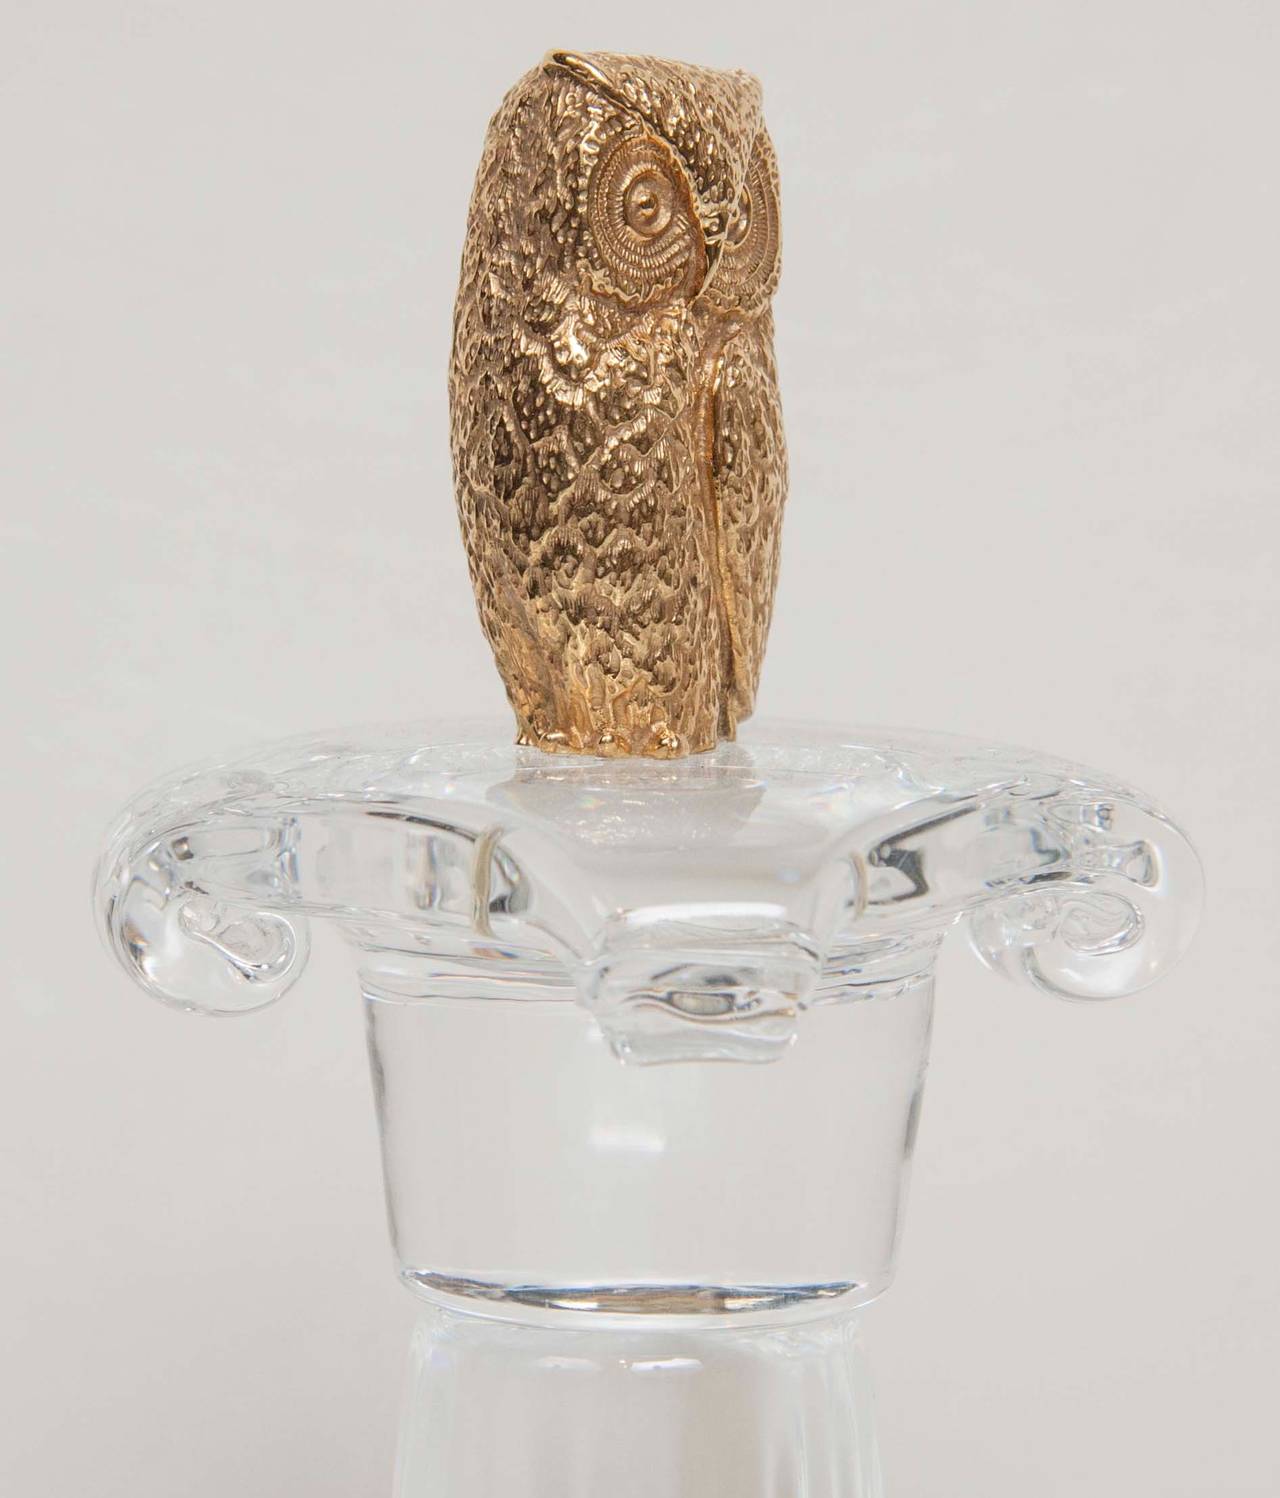 Steuben Owl on Crystal Column by James Houston In Excellent Condition For Sale In Stamford, CT